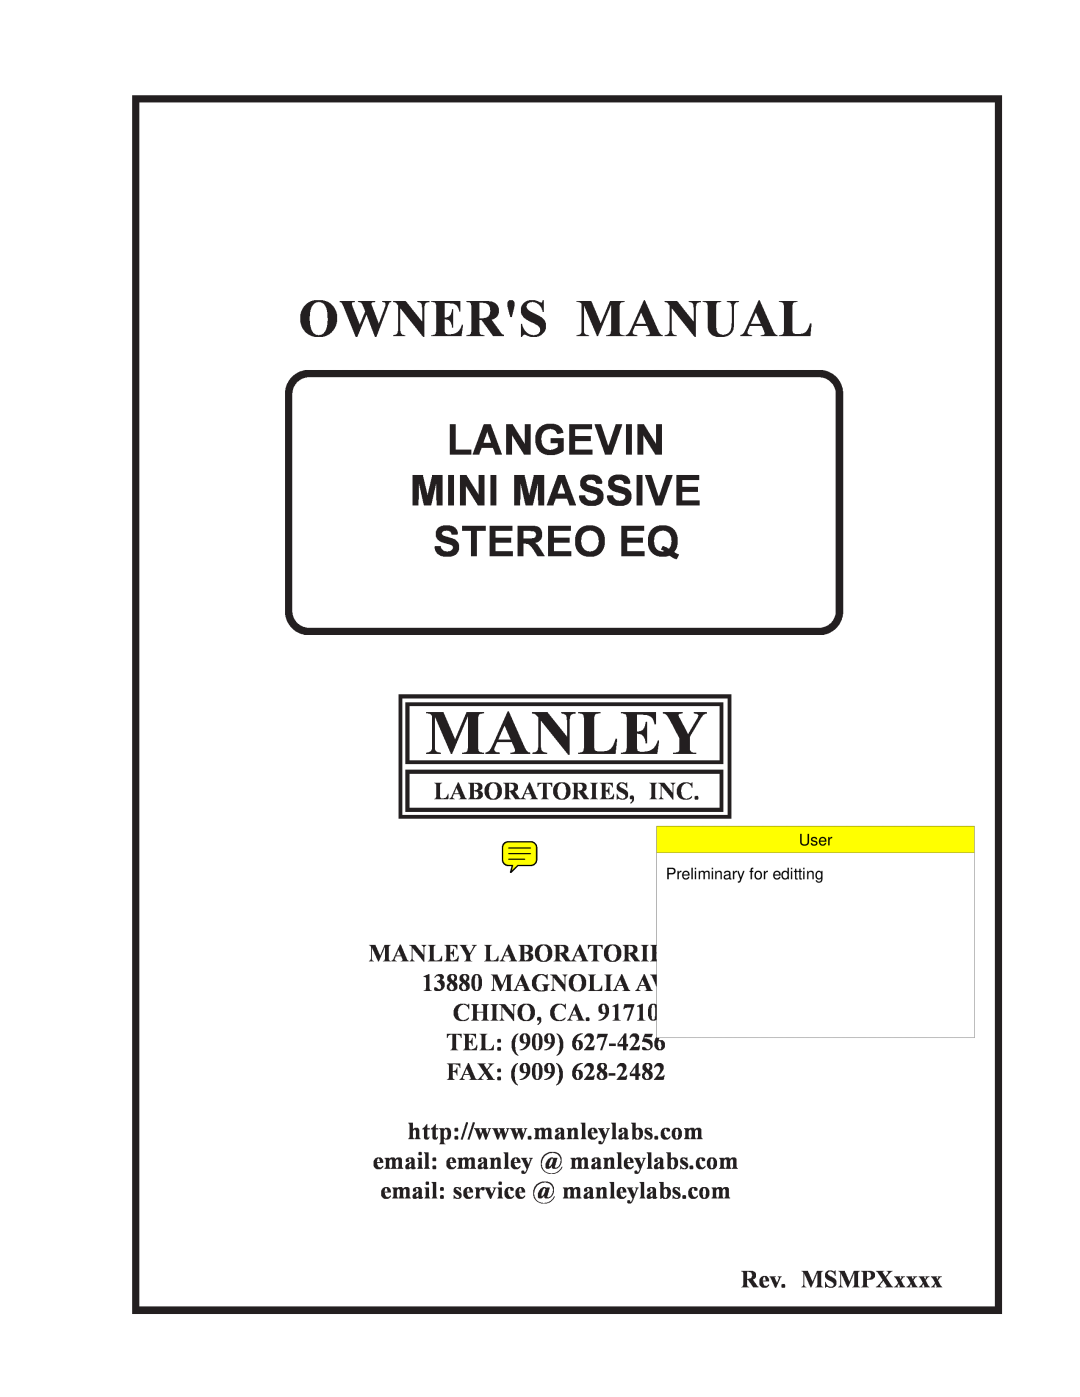 Manley Labs STEREO EQ owner manual Laboratories, Inc Manley Laboratories, Inc, MAGNOLIA AVE CHINO, CA. TEL 909 FAX 